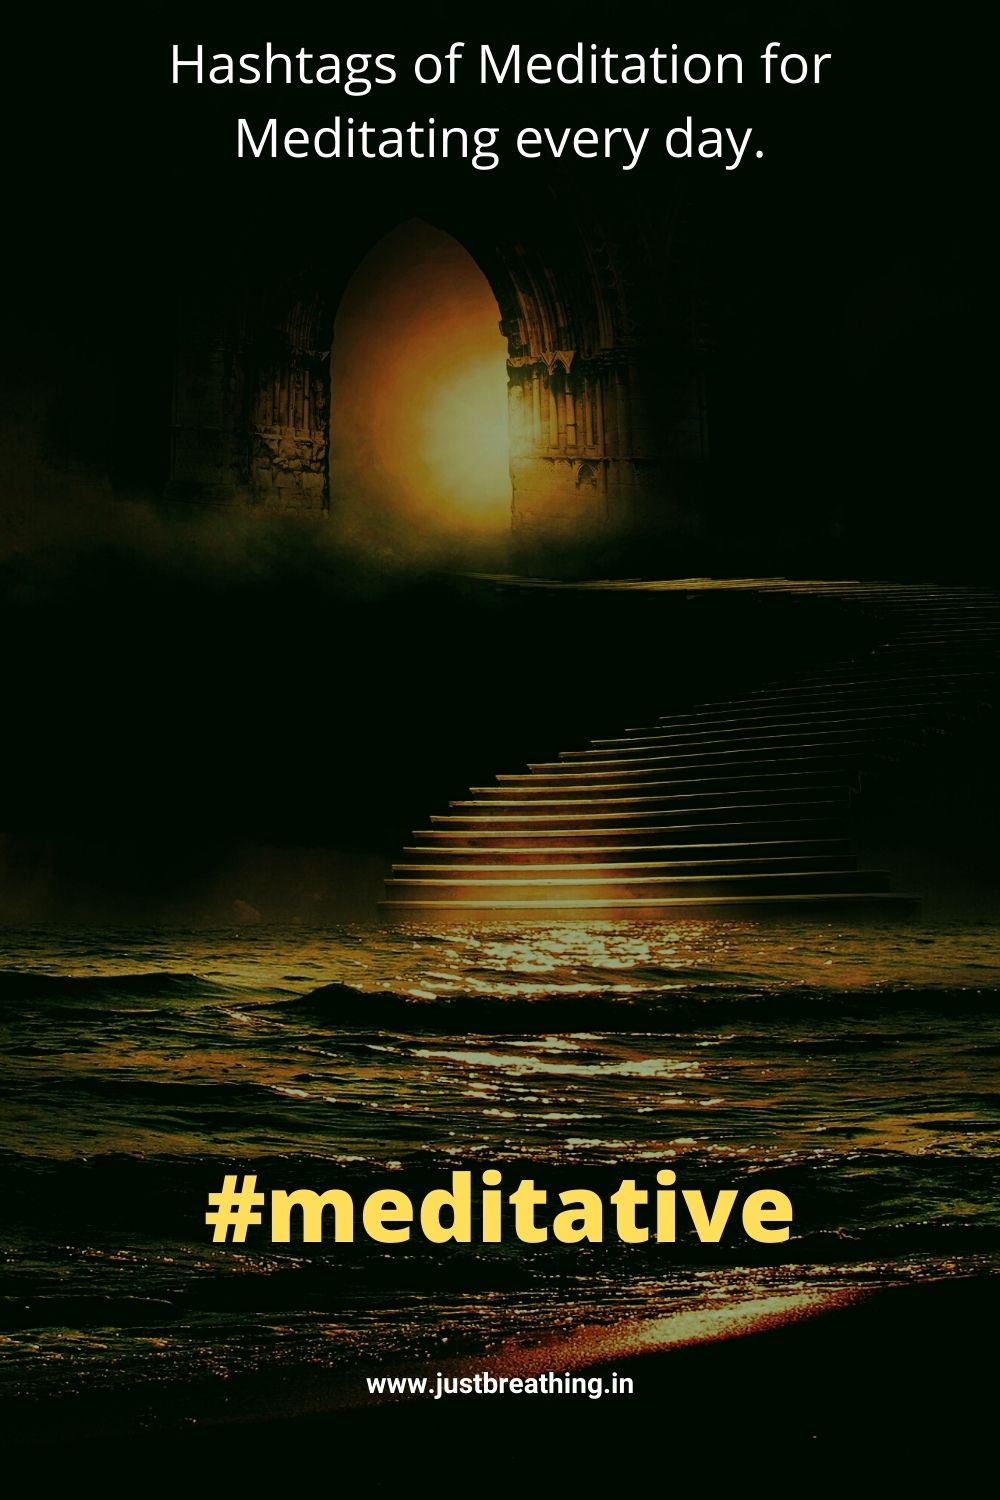 Best meditative hashtags for Instagram Hashtags of meditation for meditating every day.